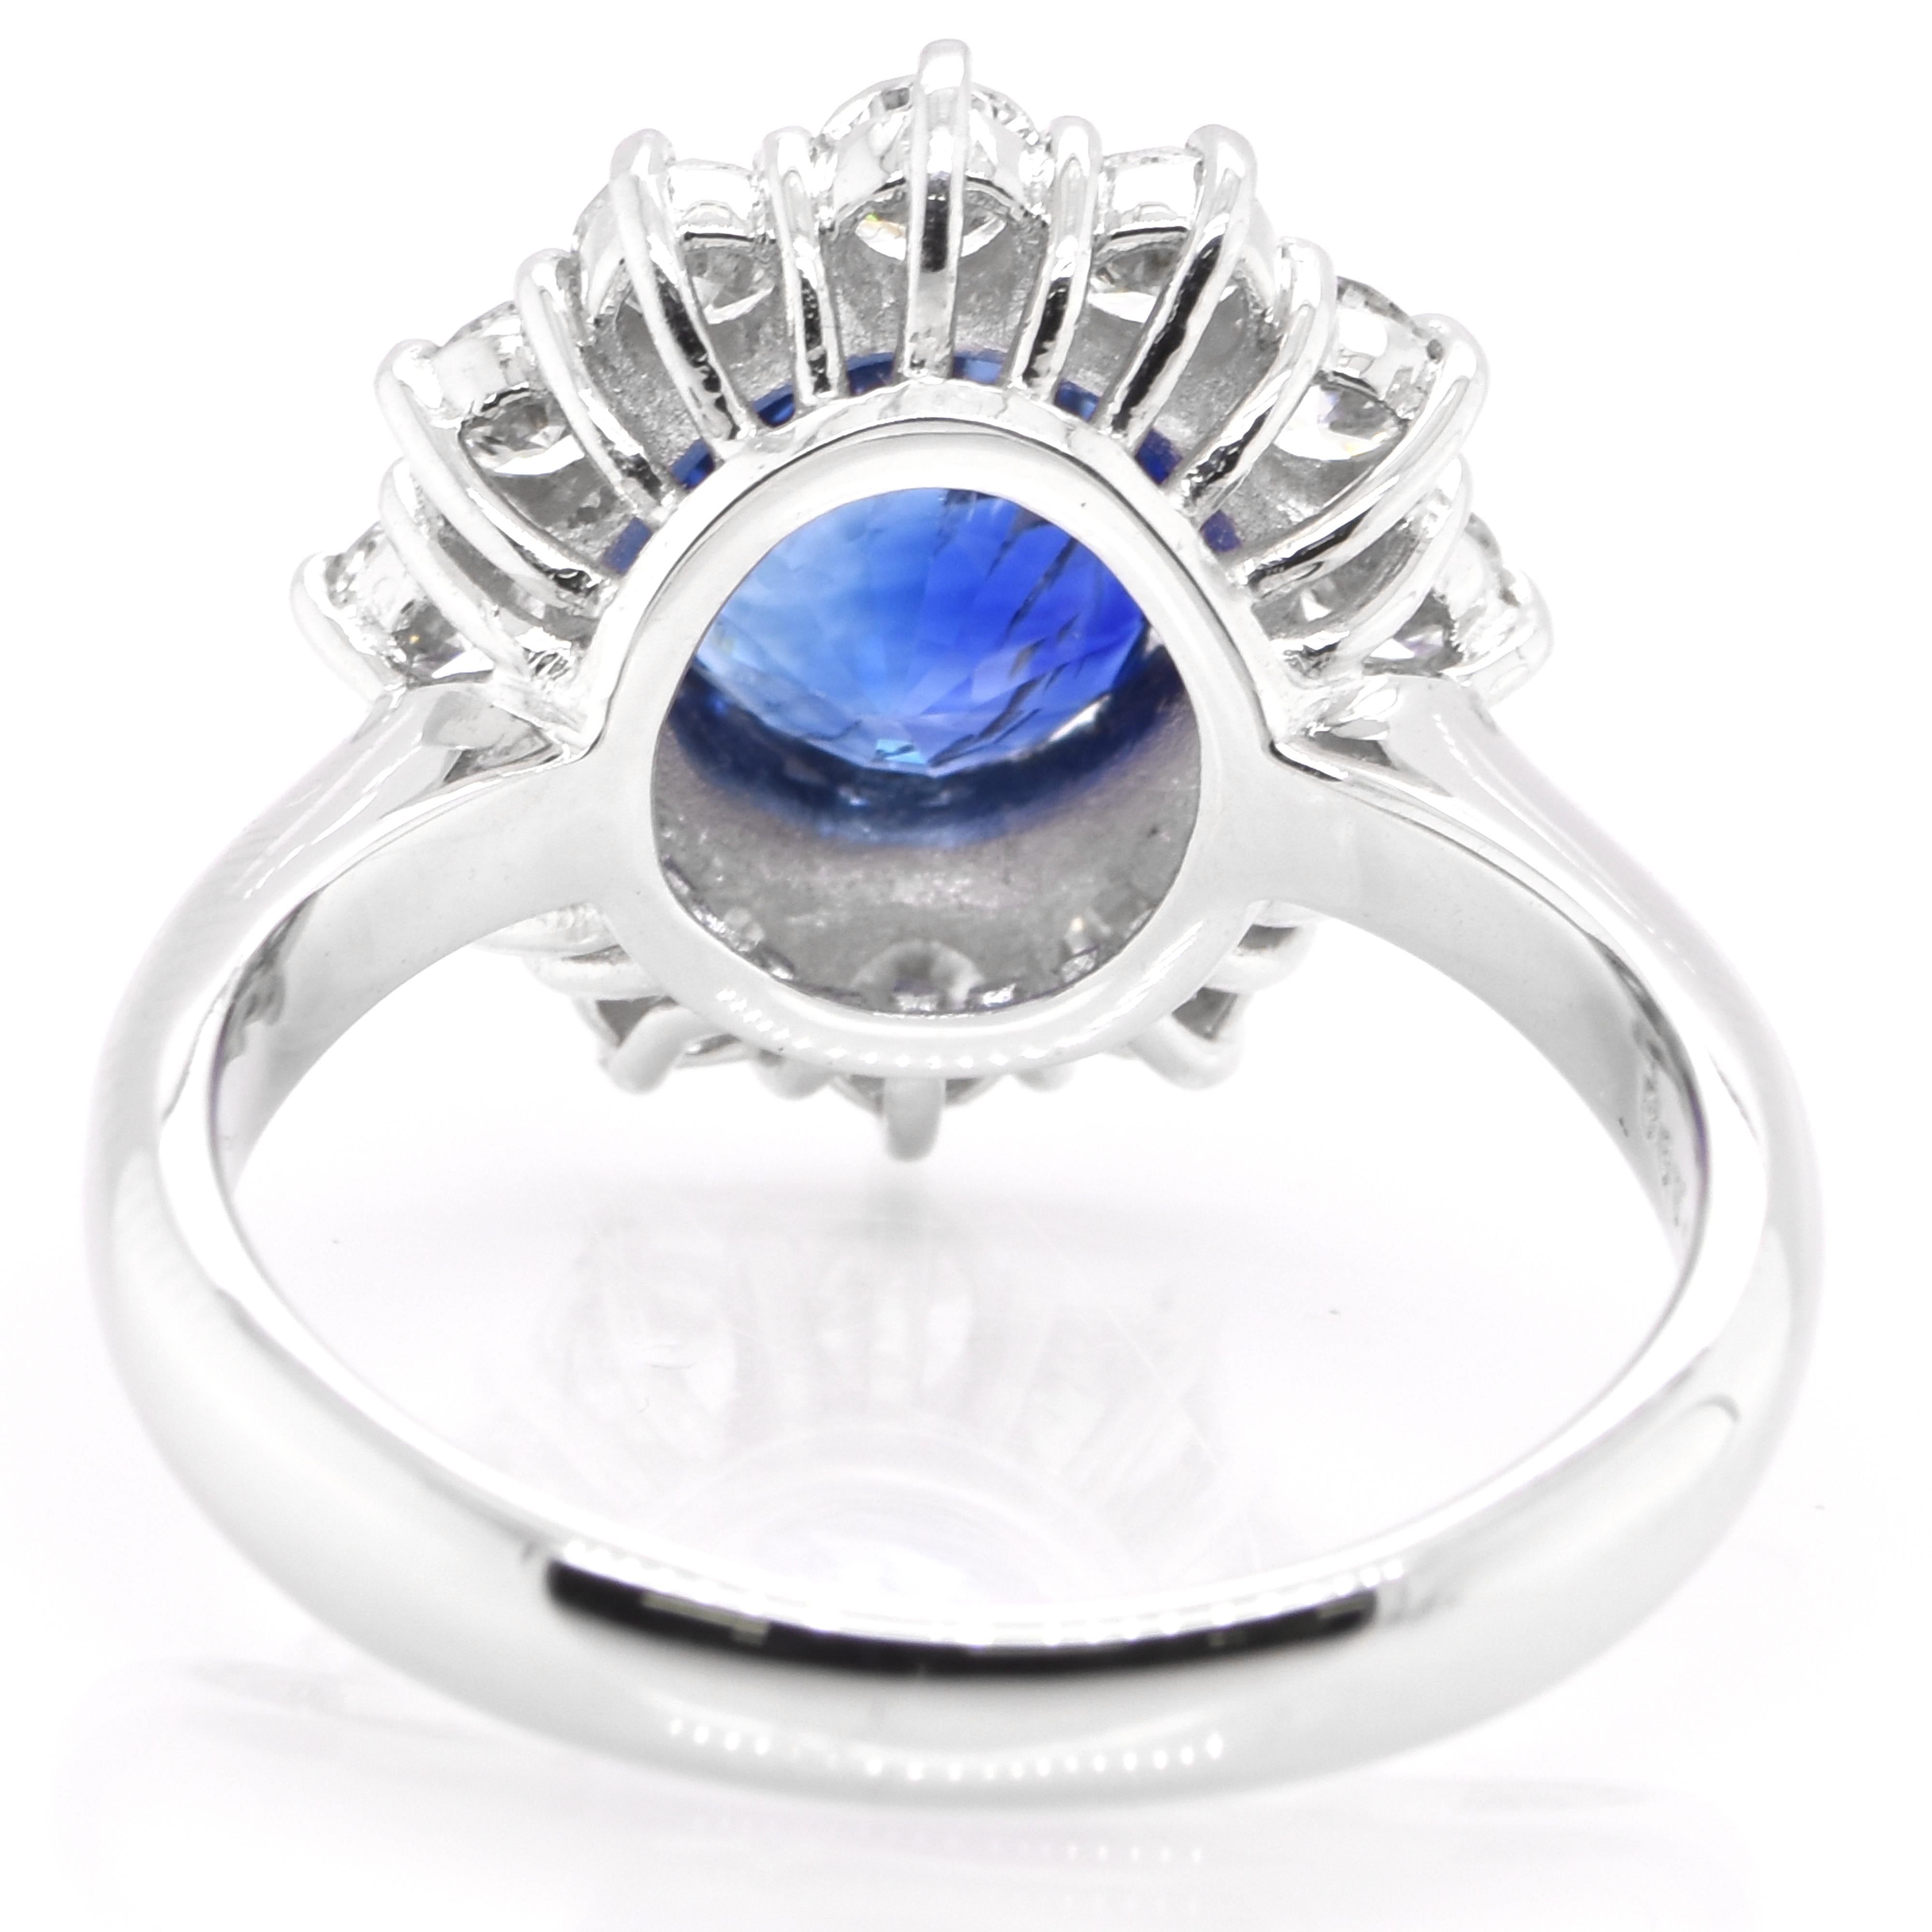 Women's 2.57 Carat Natural Royal Blue Sapphire and Diamond Ring Set in Platinum For Sale